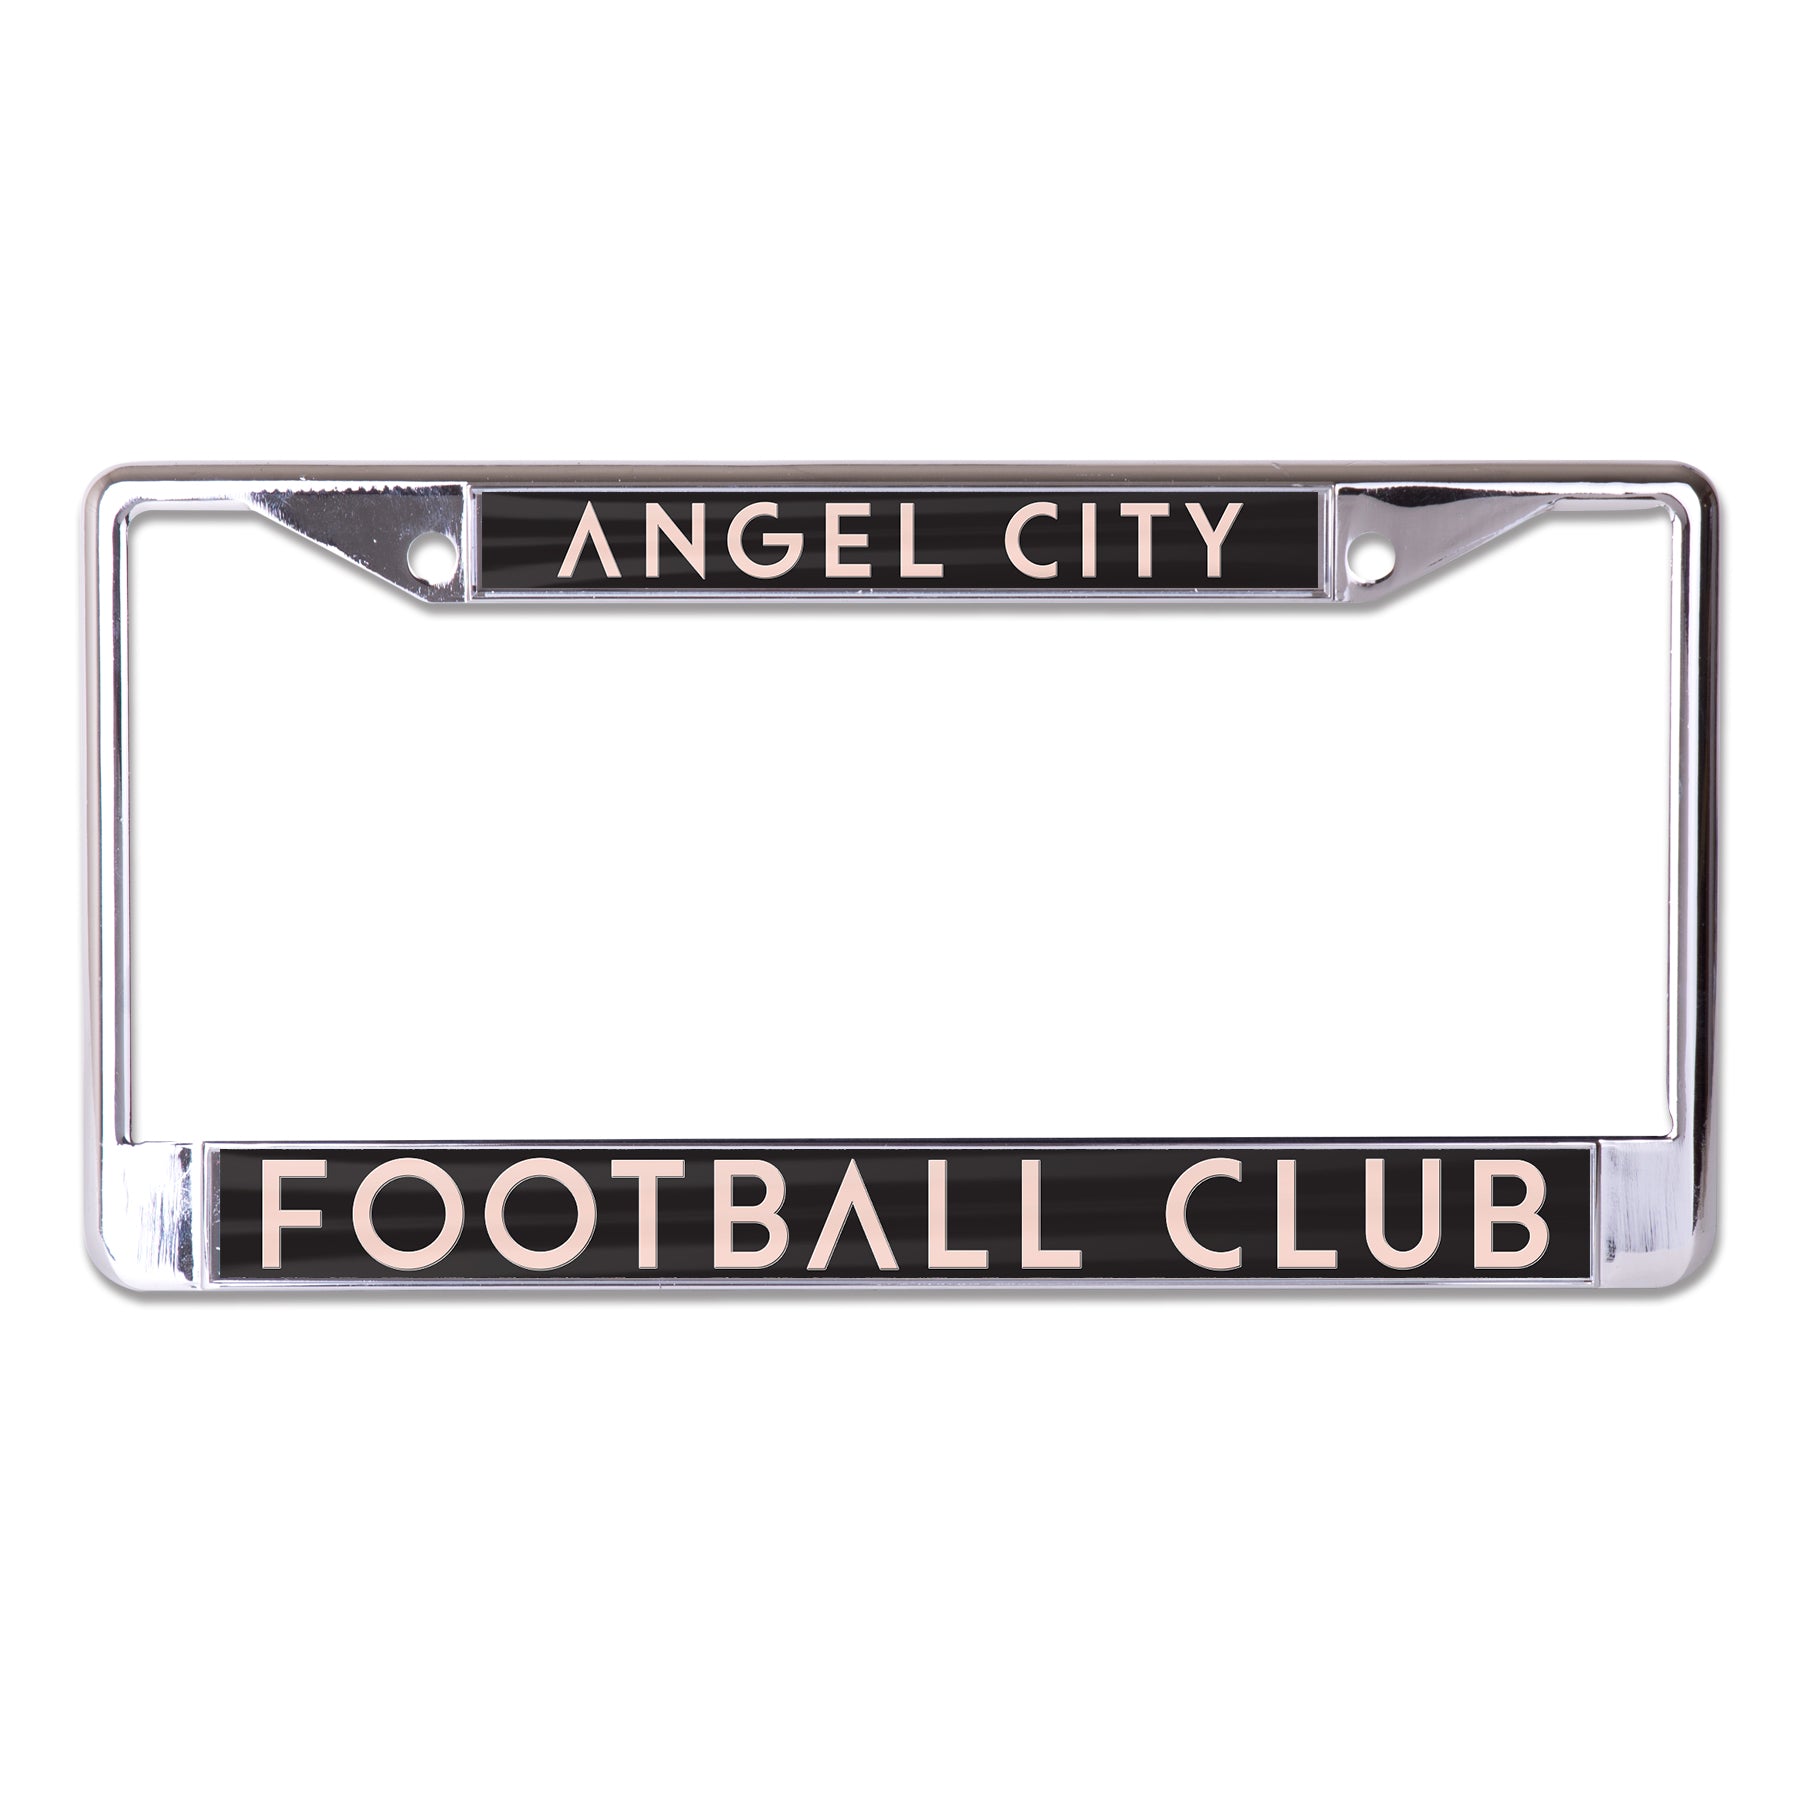 Angel City FC x Mitchell and Ness Old English Wordmark Adjustable Snap